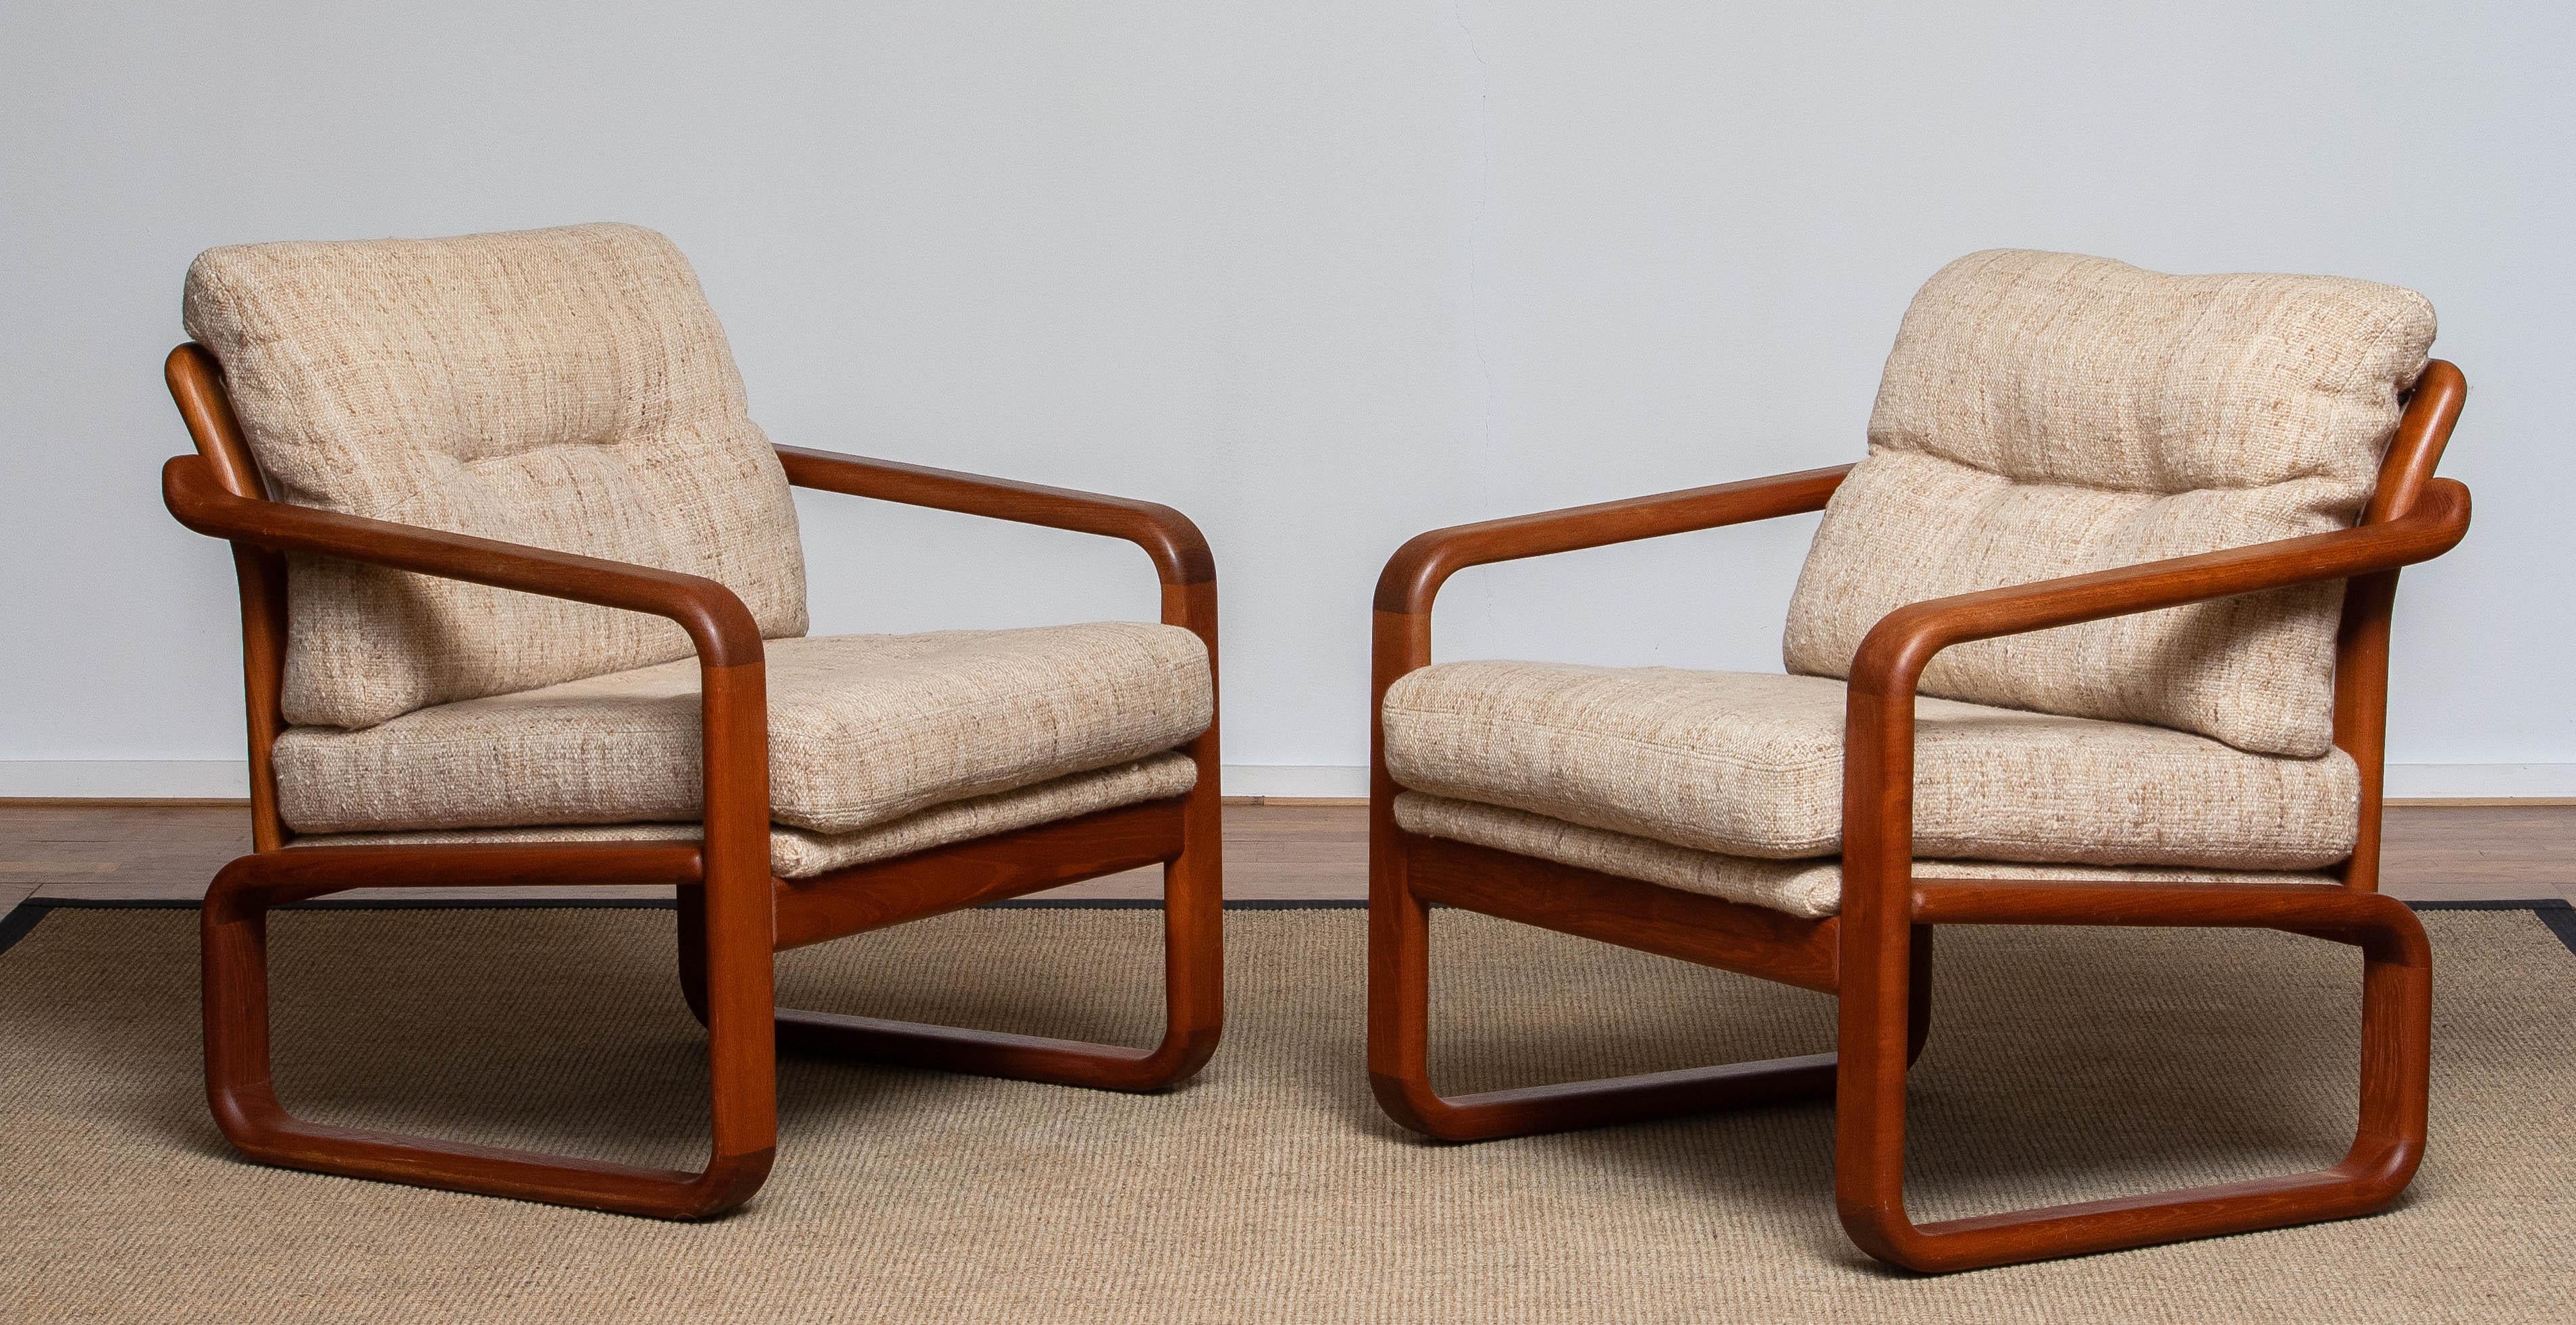 1980's Teak with Wool Cushions Lounge / Easy / Club Chair by Hs Design, Denmark For Sale 2